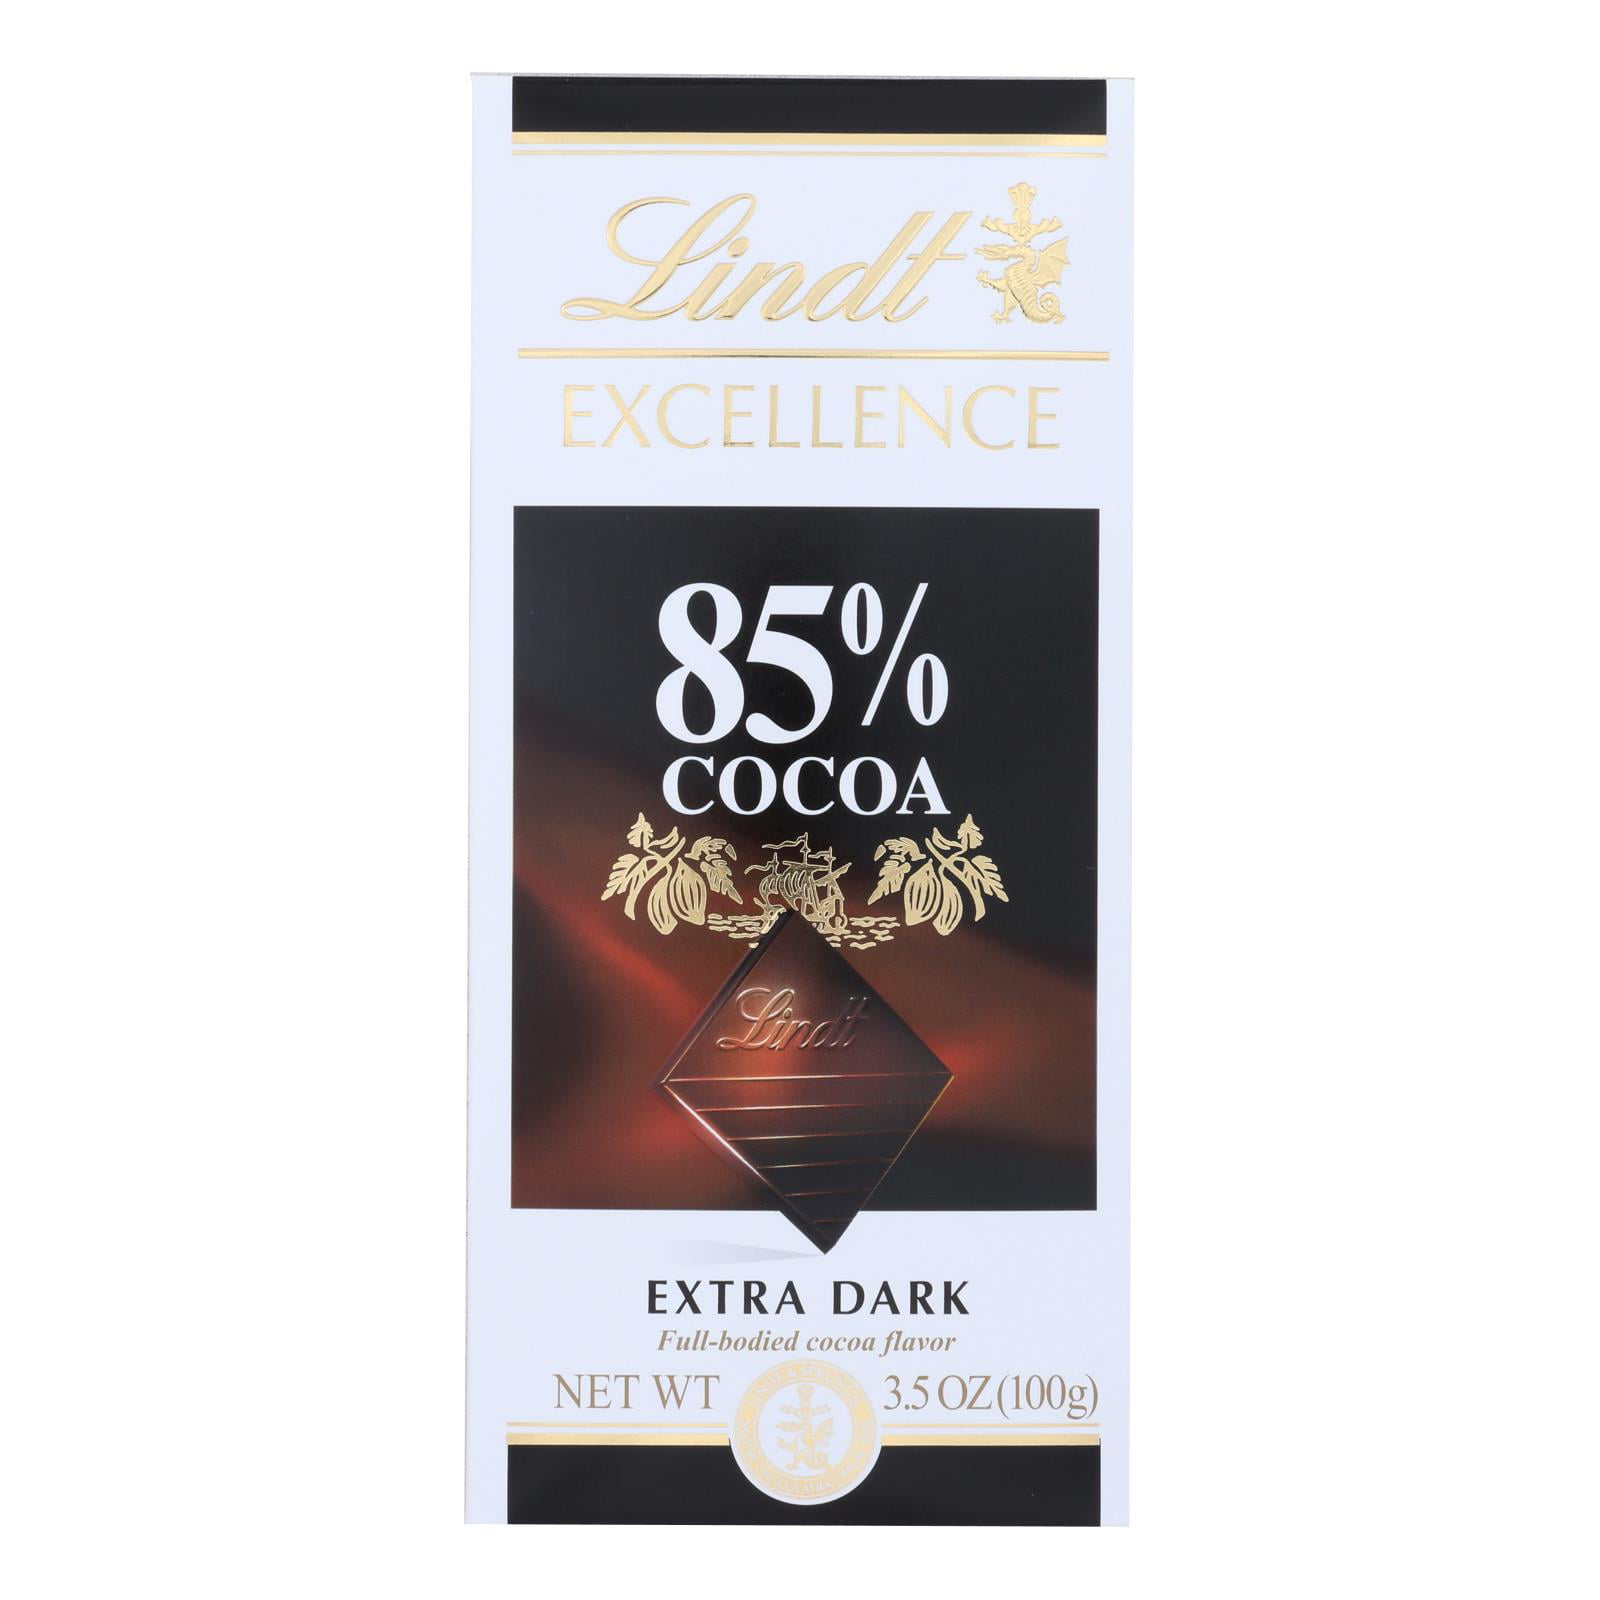 Lindt Excellence 85% Cocoa Dark Chocolate Candy Bar - 3.5 oz.